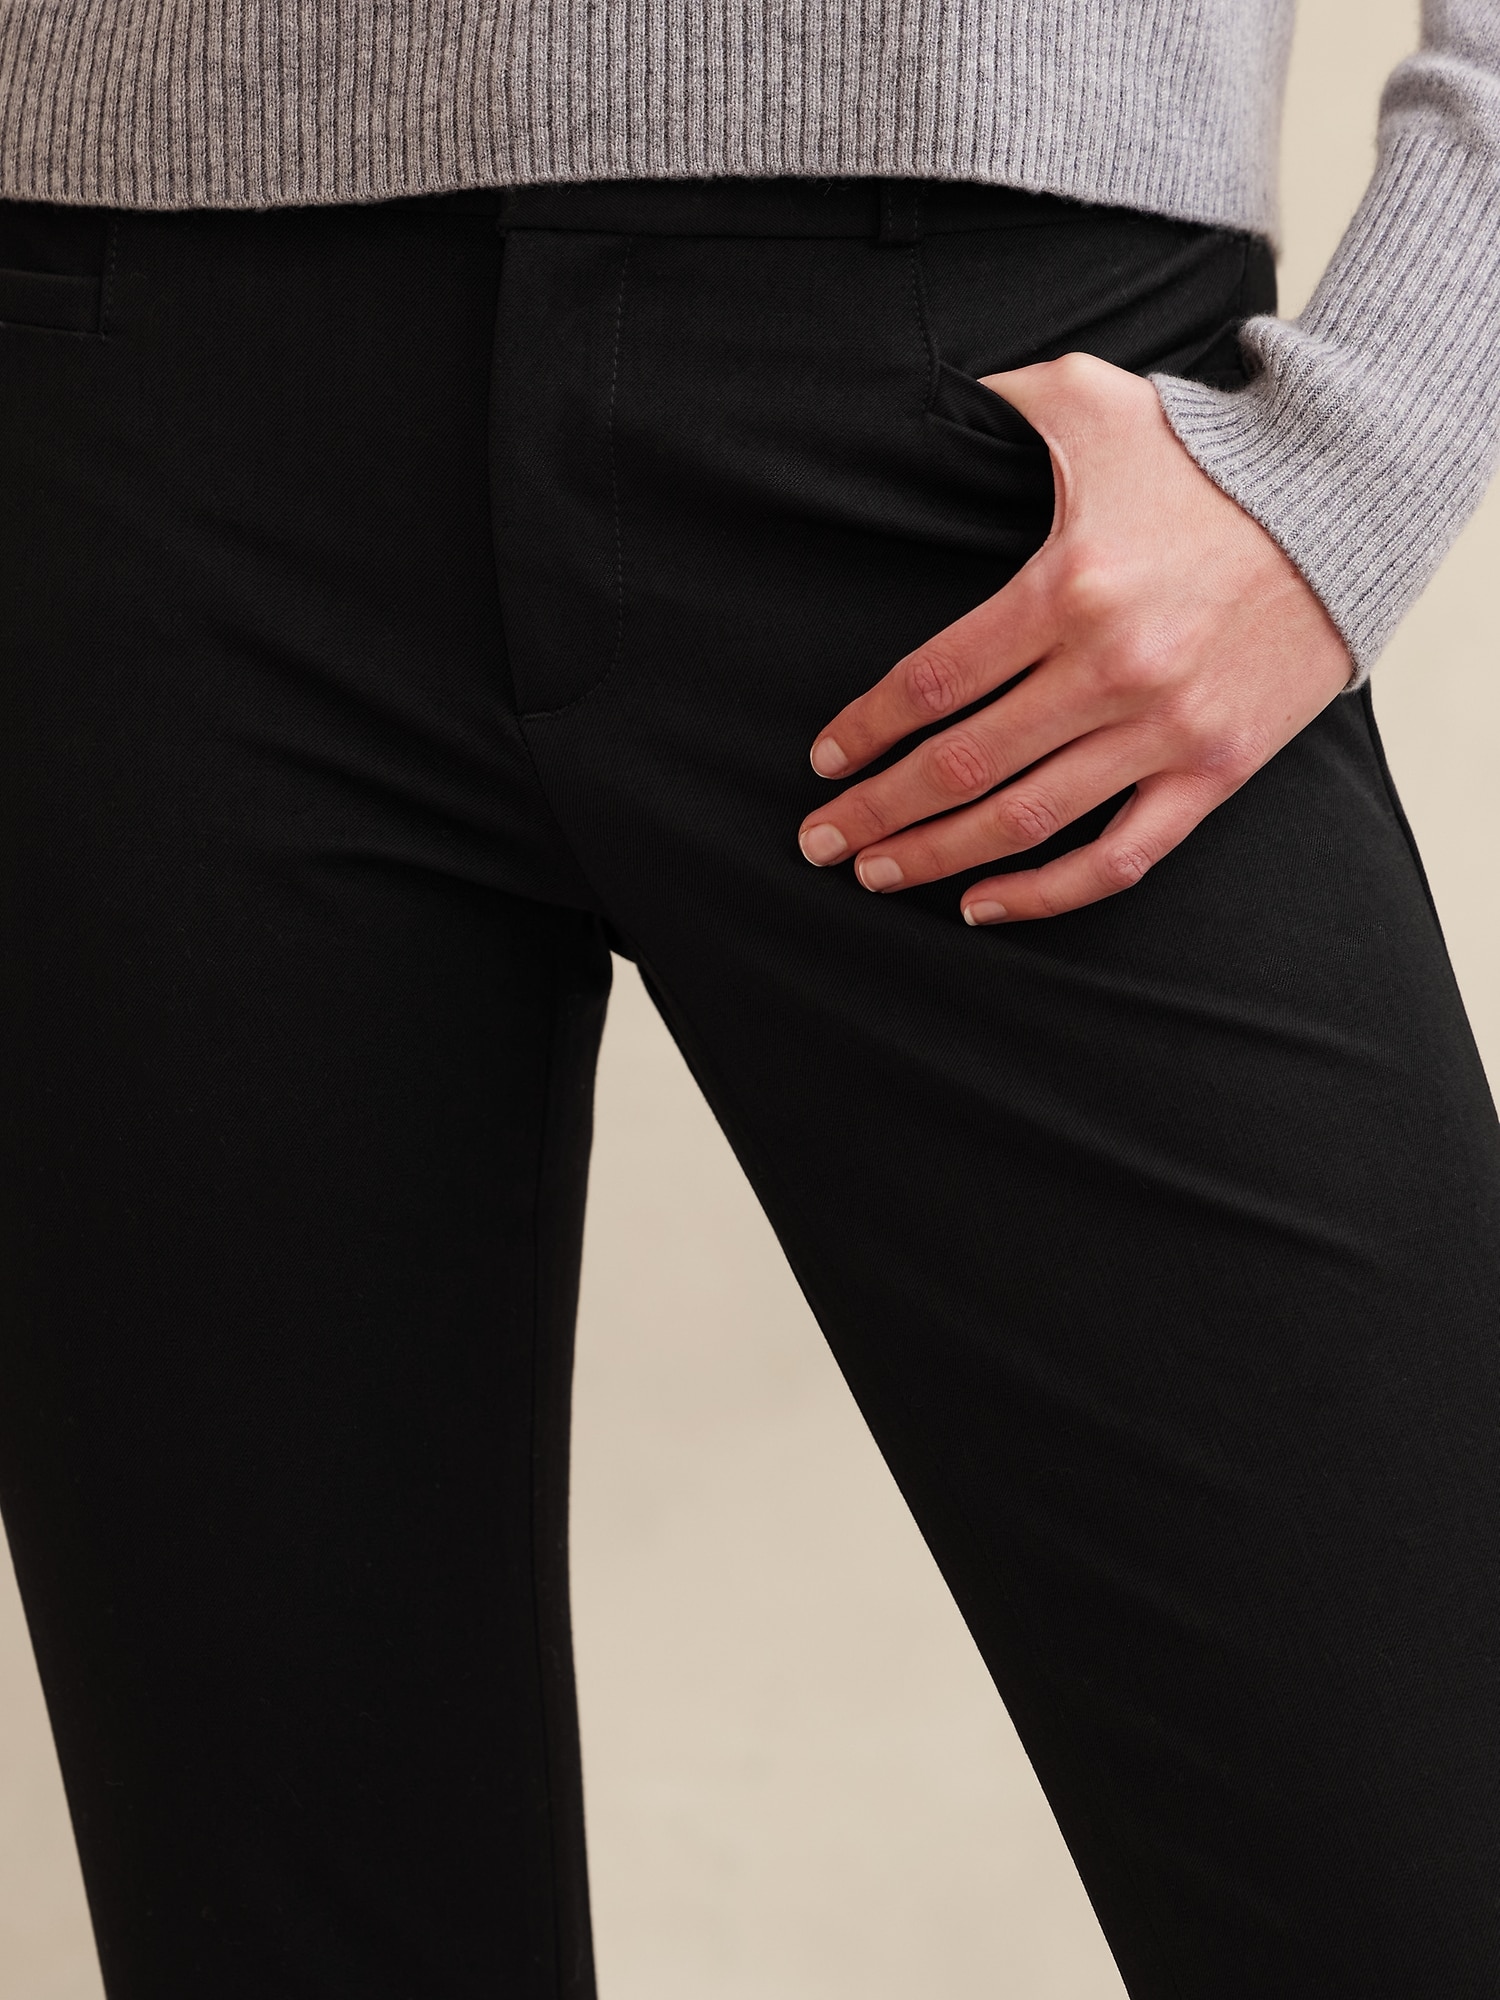 Banana Republic Sloan Pants: A (Not So Good) Review - FASHION AND FRAPPES %